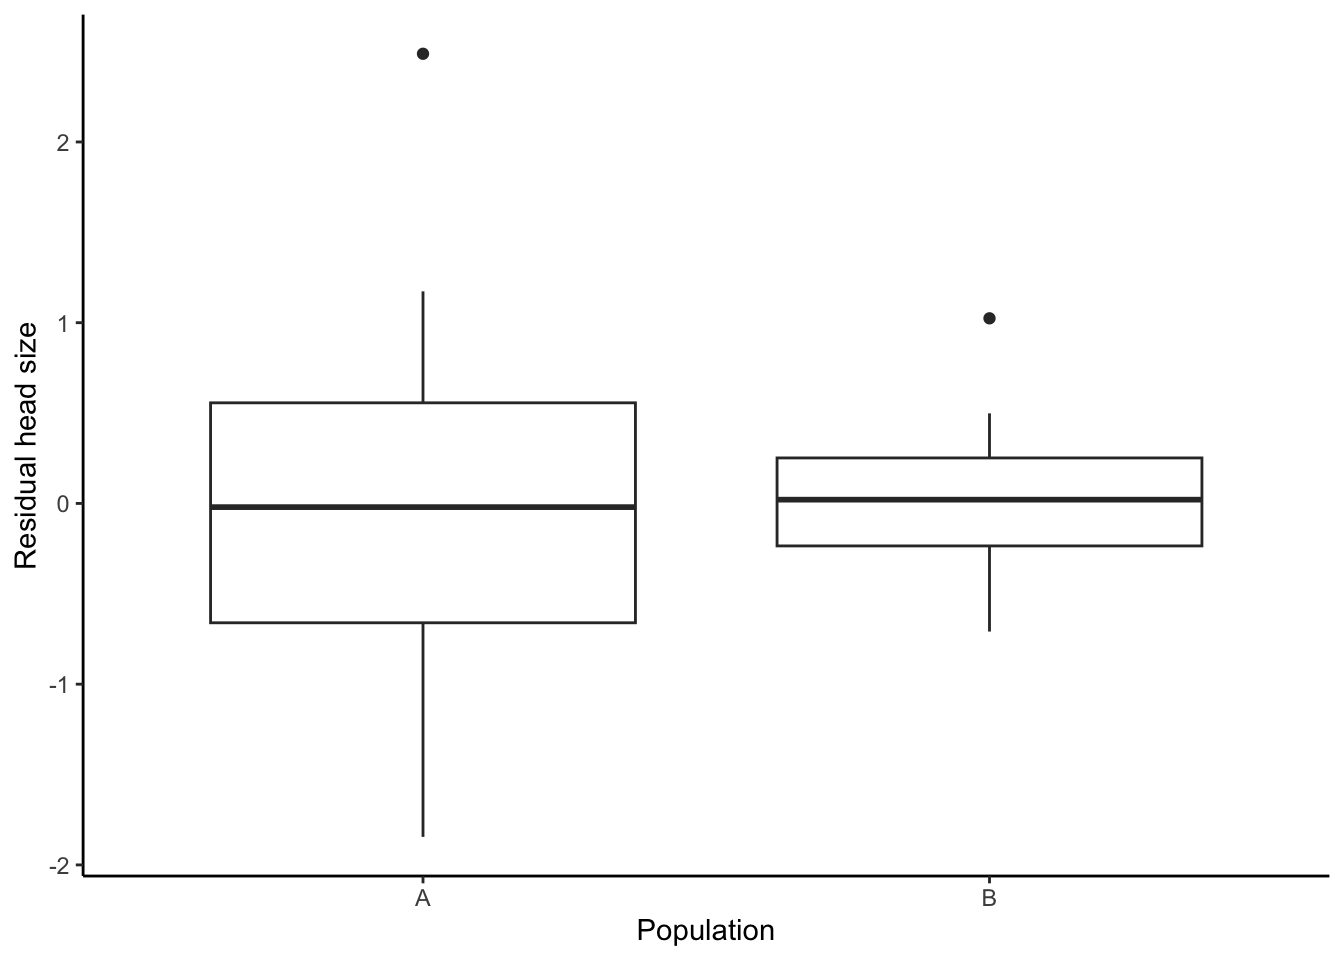 Plotting relative head size reveals no differences between the two populations.